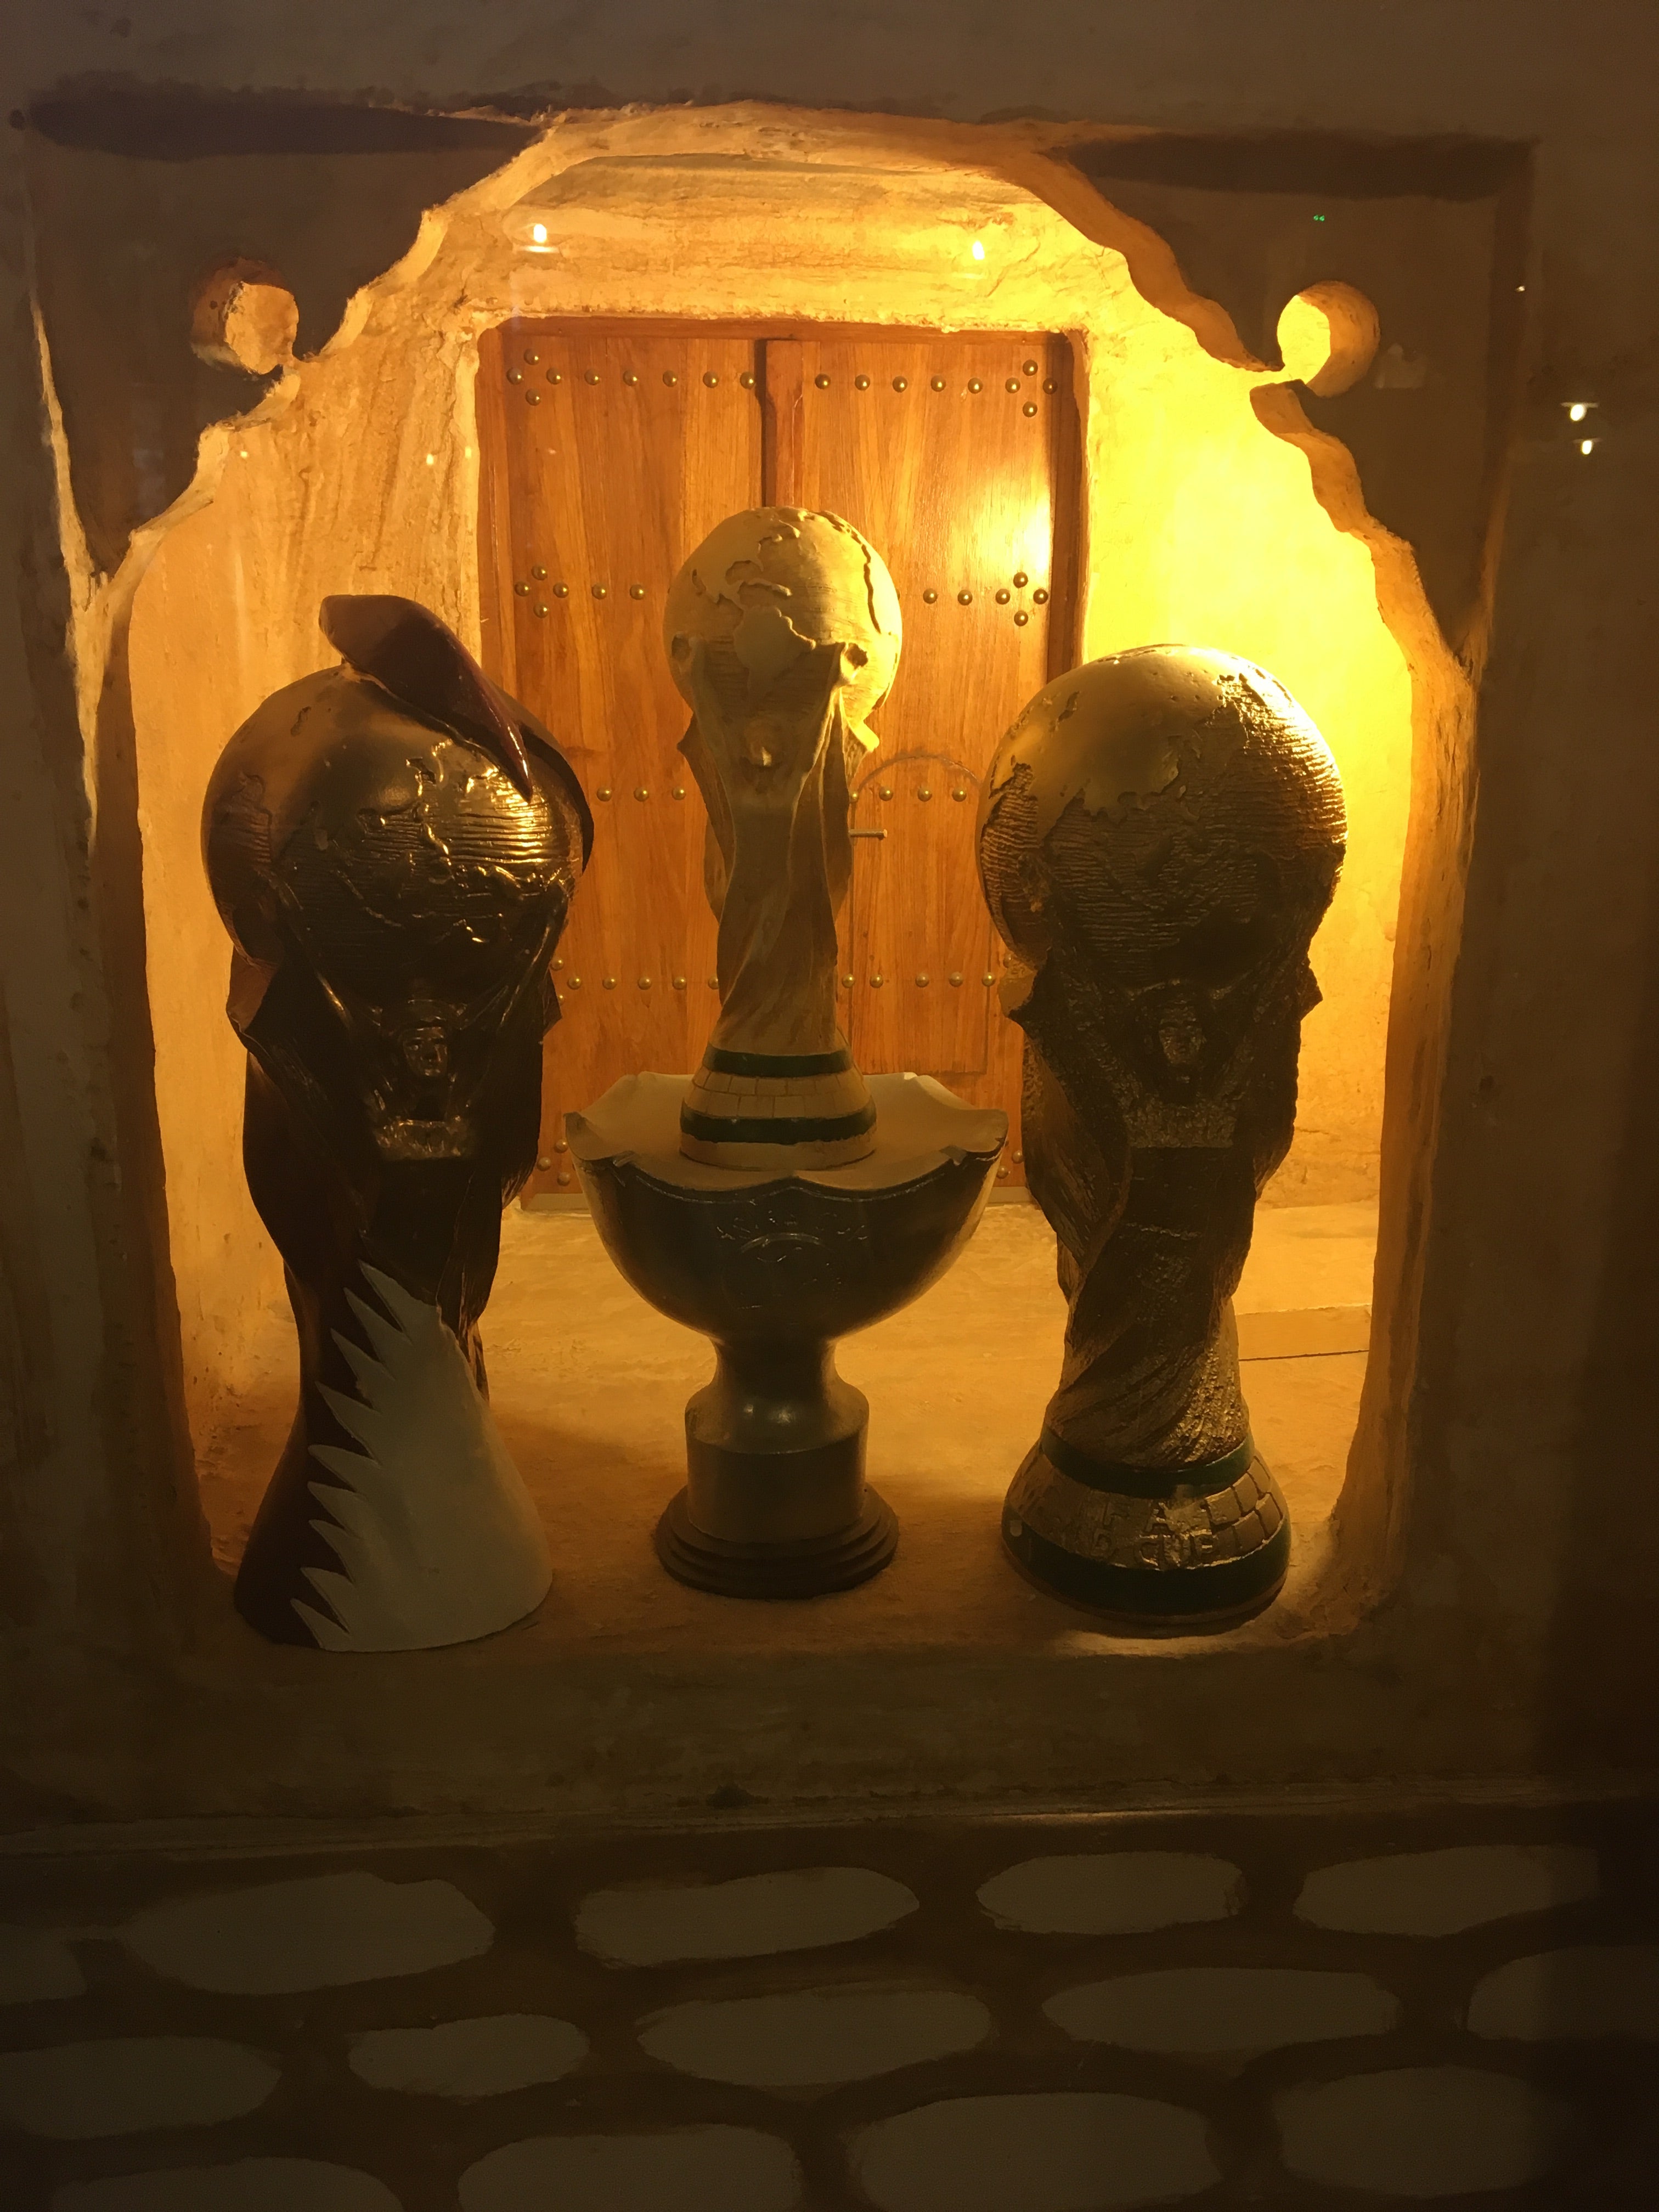 A model World Cup on display in Doha’s Souq Waqif